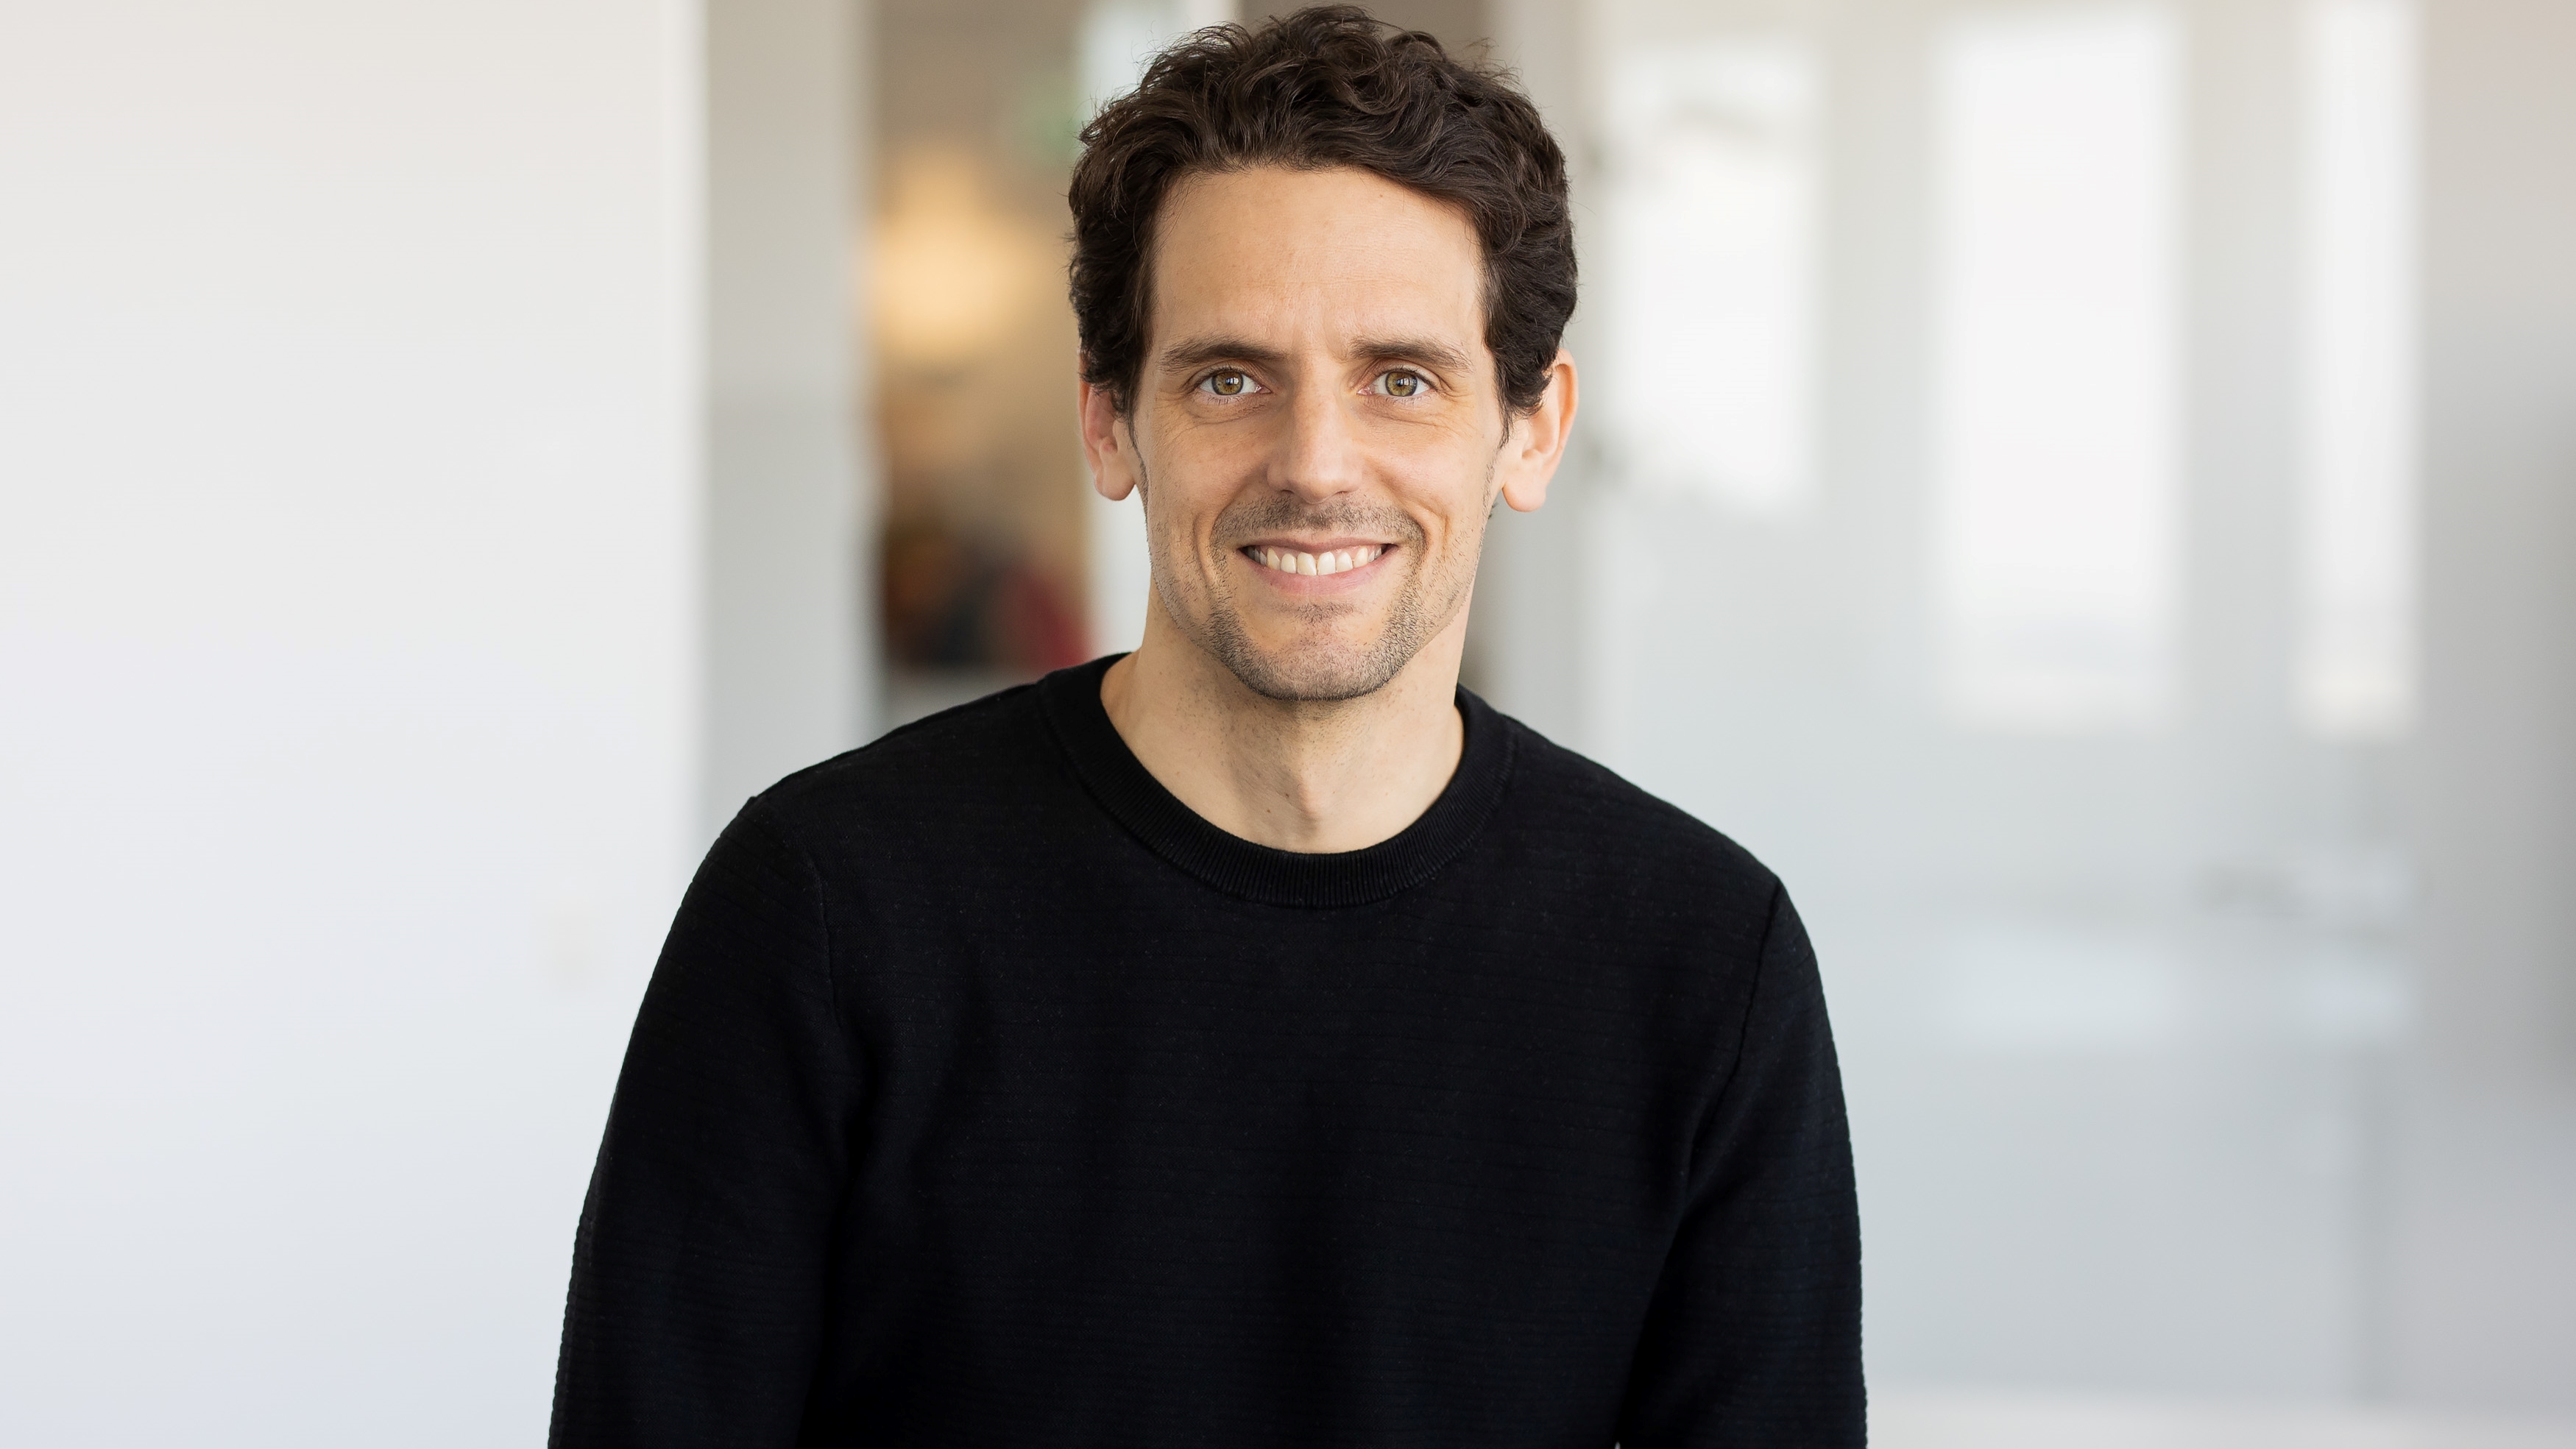 Florian Bell wird Chief Executive Officer der Eat Happy Group - Quelle: Eat Happy Group